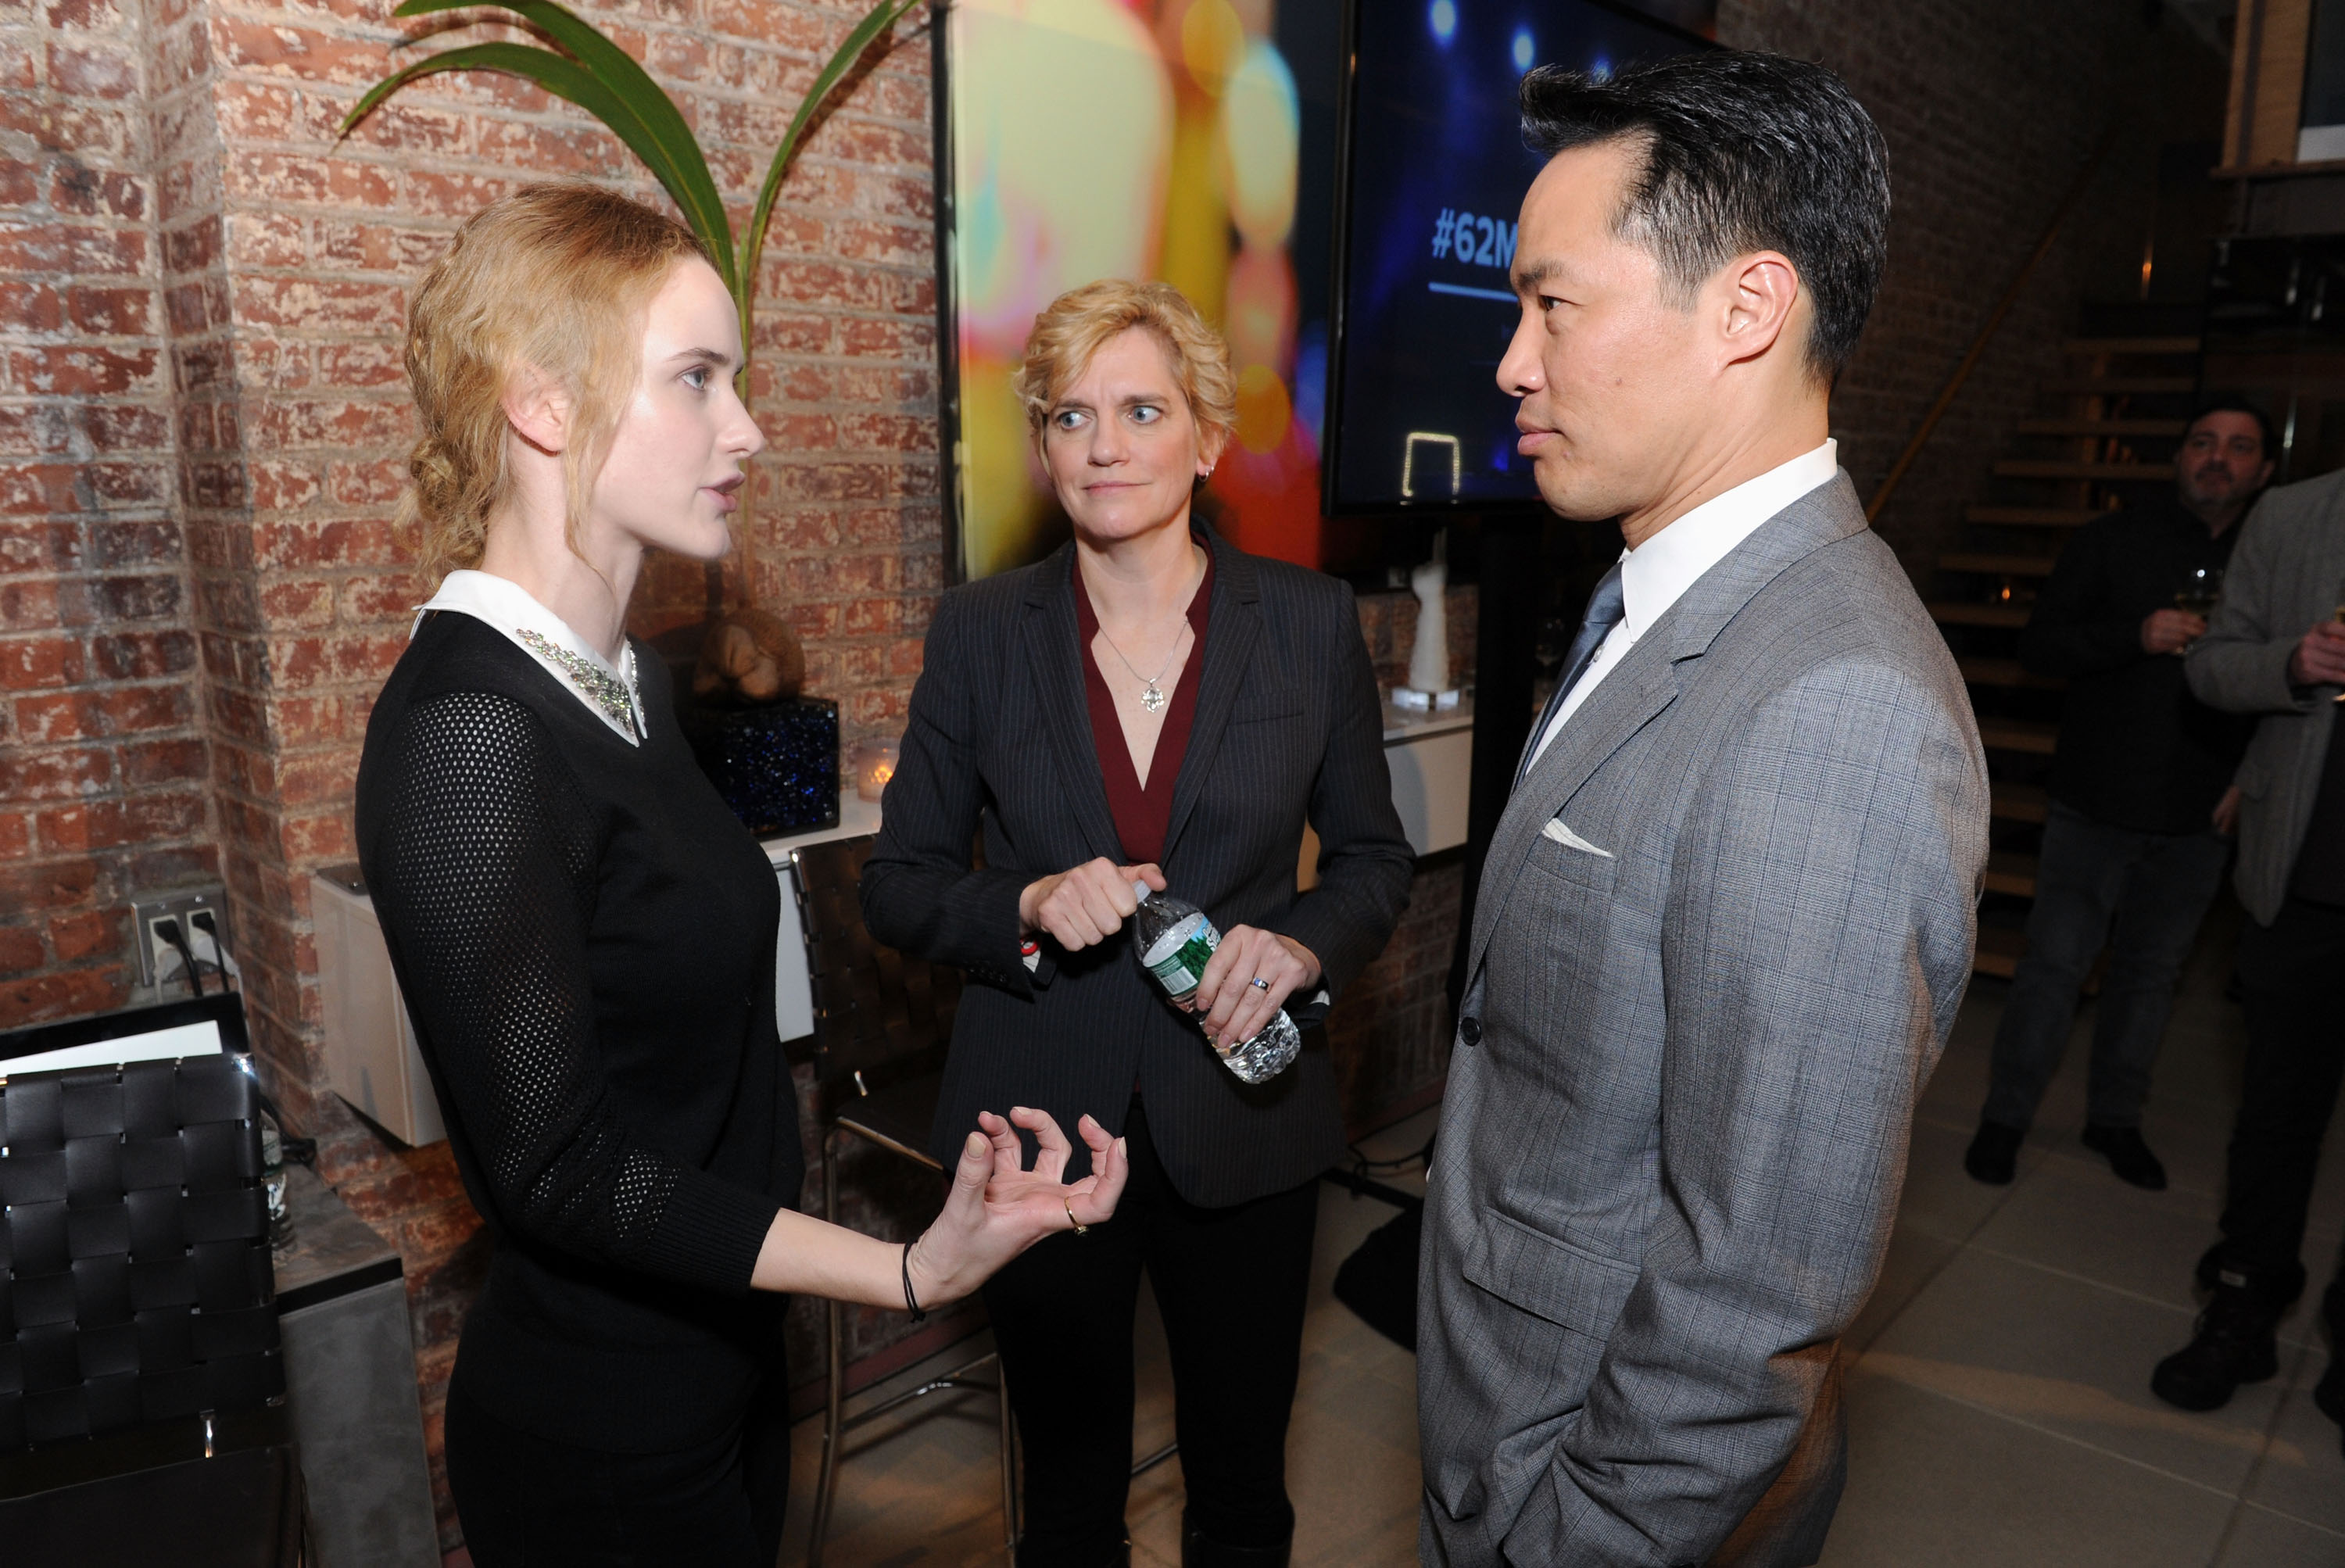 NEW YORK, NY - JANUARY 28: Rachel Brosnahan, Jane Meseck and Richard Lui attend Upgrade Your World panel discussion hosted by Global Citizen and Windows 10 about the Global Goals on January 28, 2016 in New York City. (Photo by Craig Barritt/Getty Images for Global Citizen)